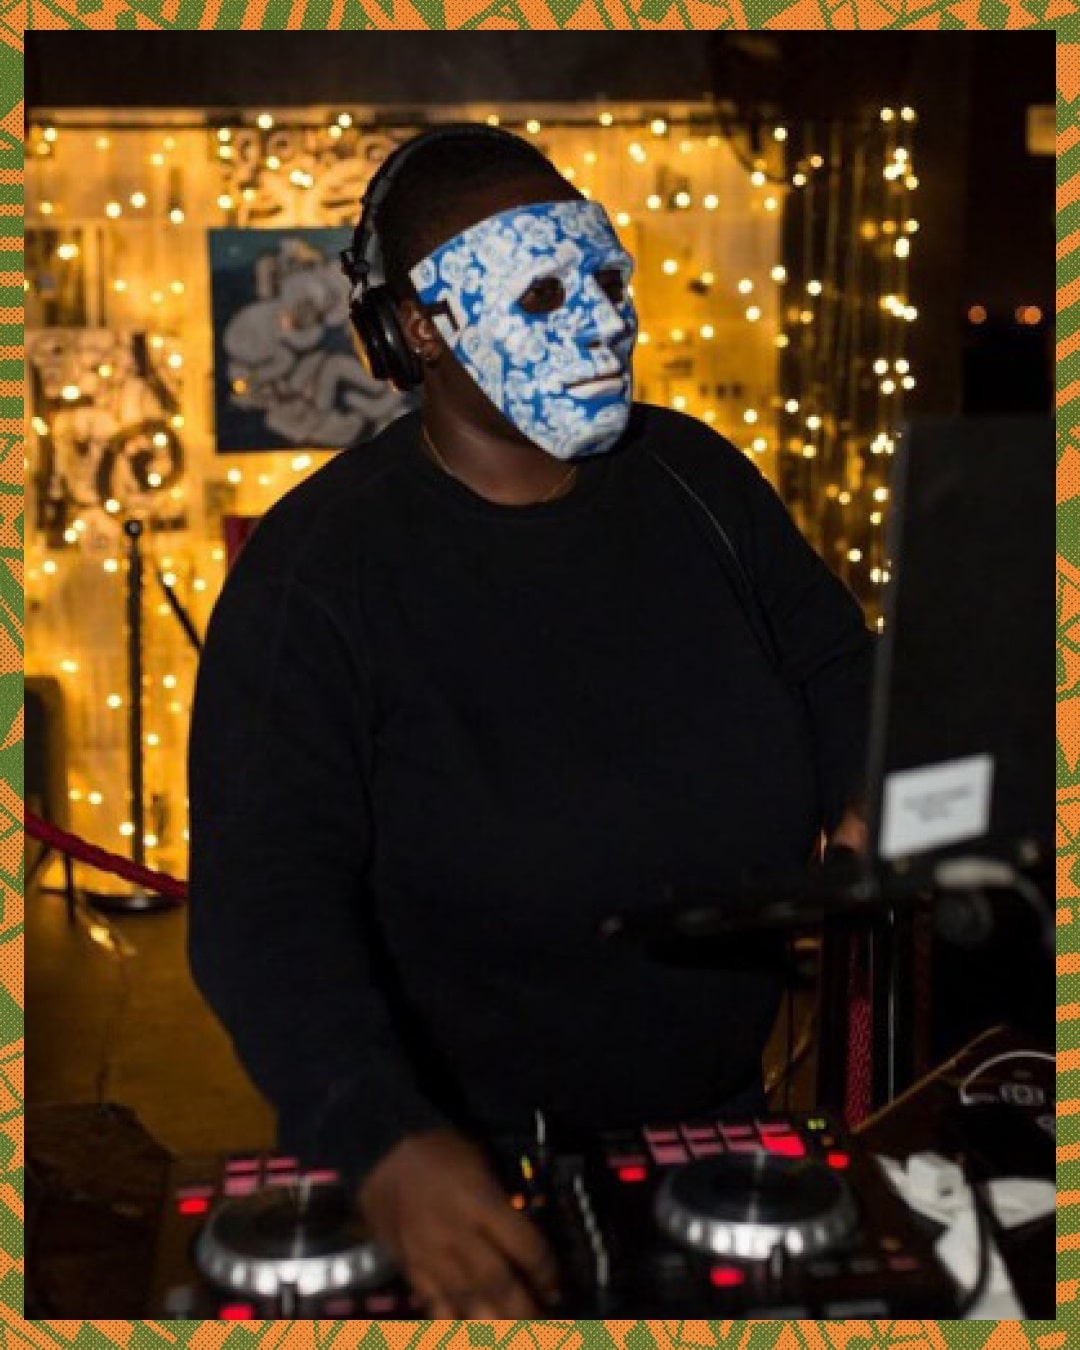 Ghana’s TMSKD (THE MASKED DJ) featured on MIXMAG